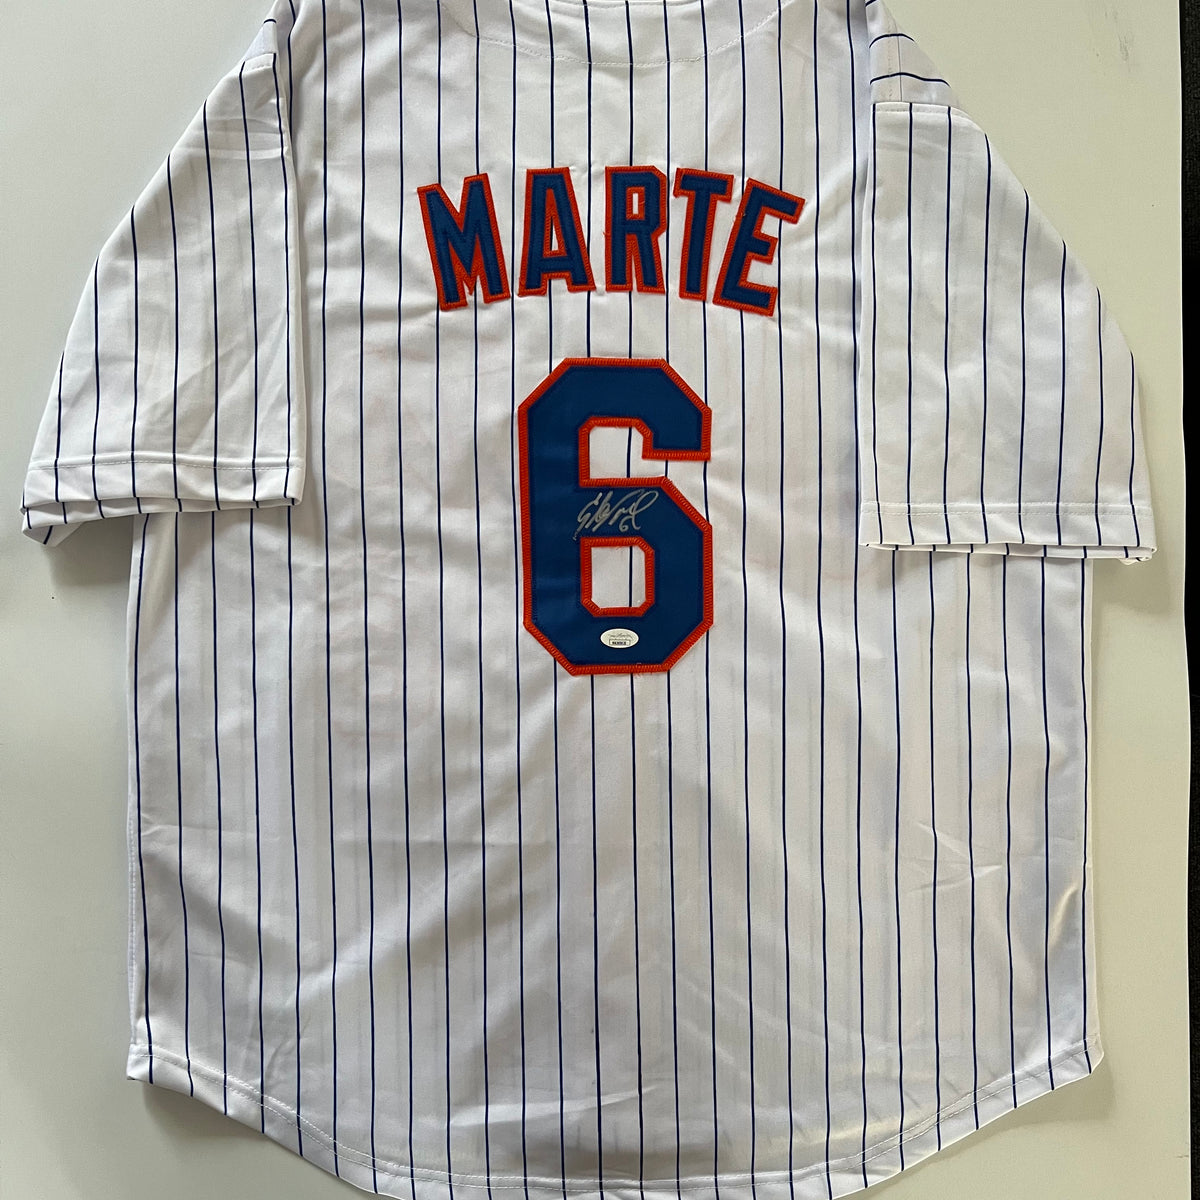 Starling Marte Signed New York Mets Jersey PSA DNA Coa Autographed